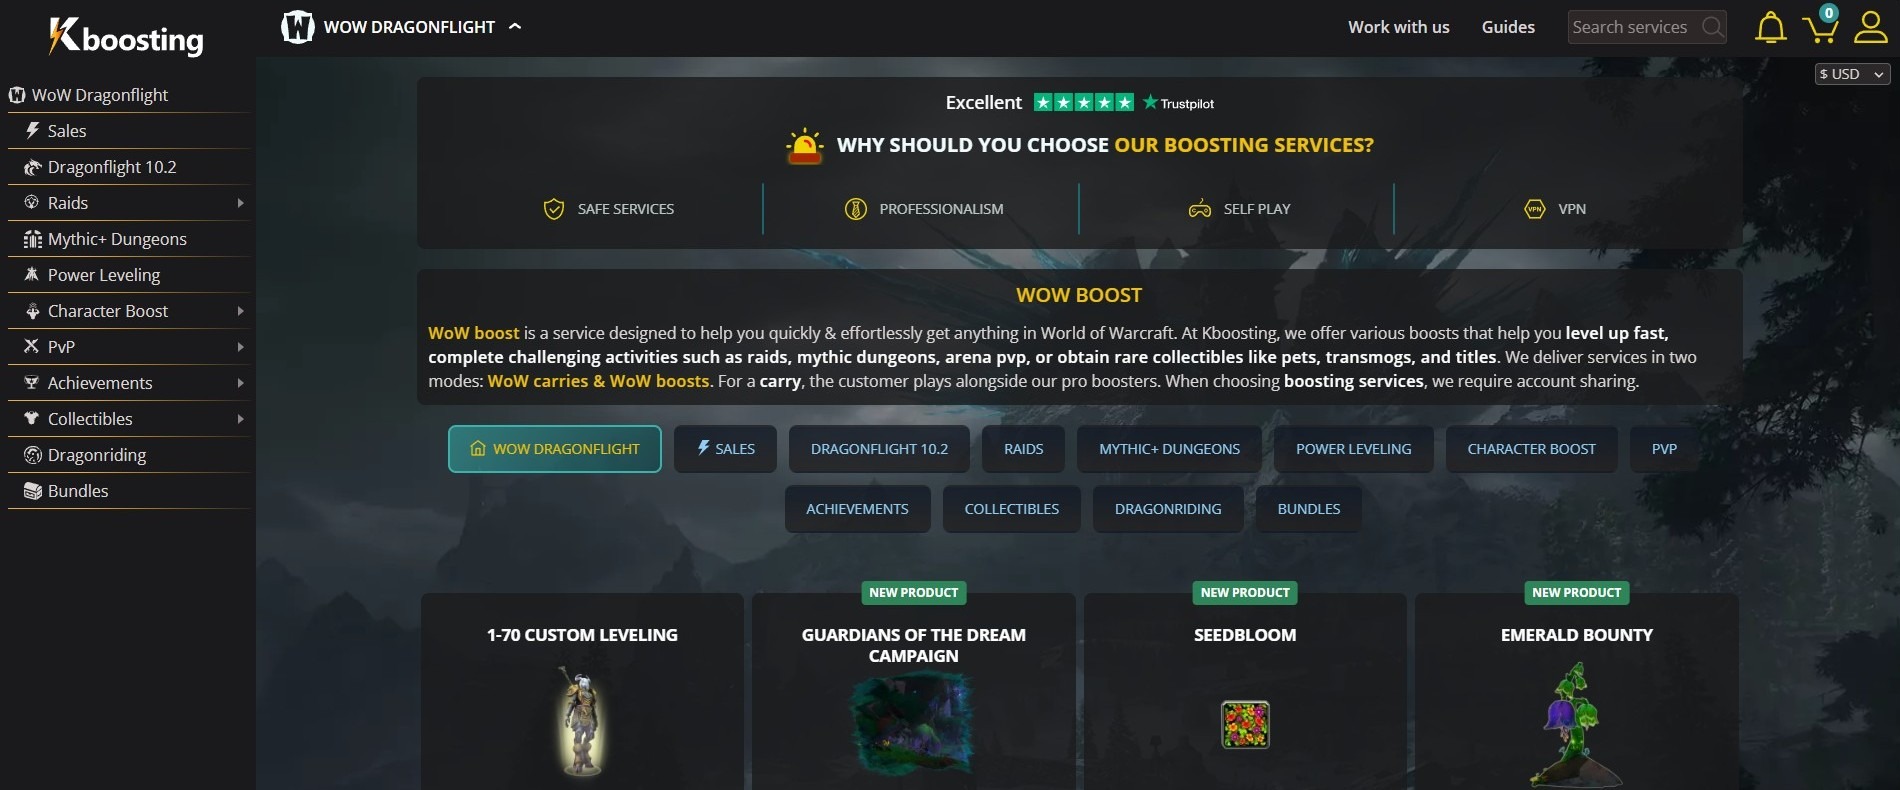 Kboosting.com is a WoW boosting site that cannot impress with its website design